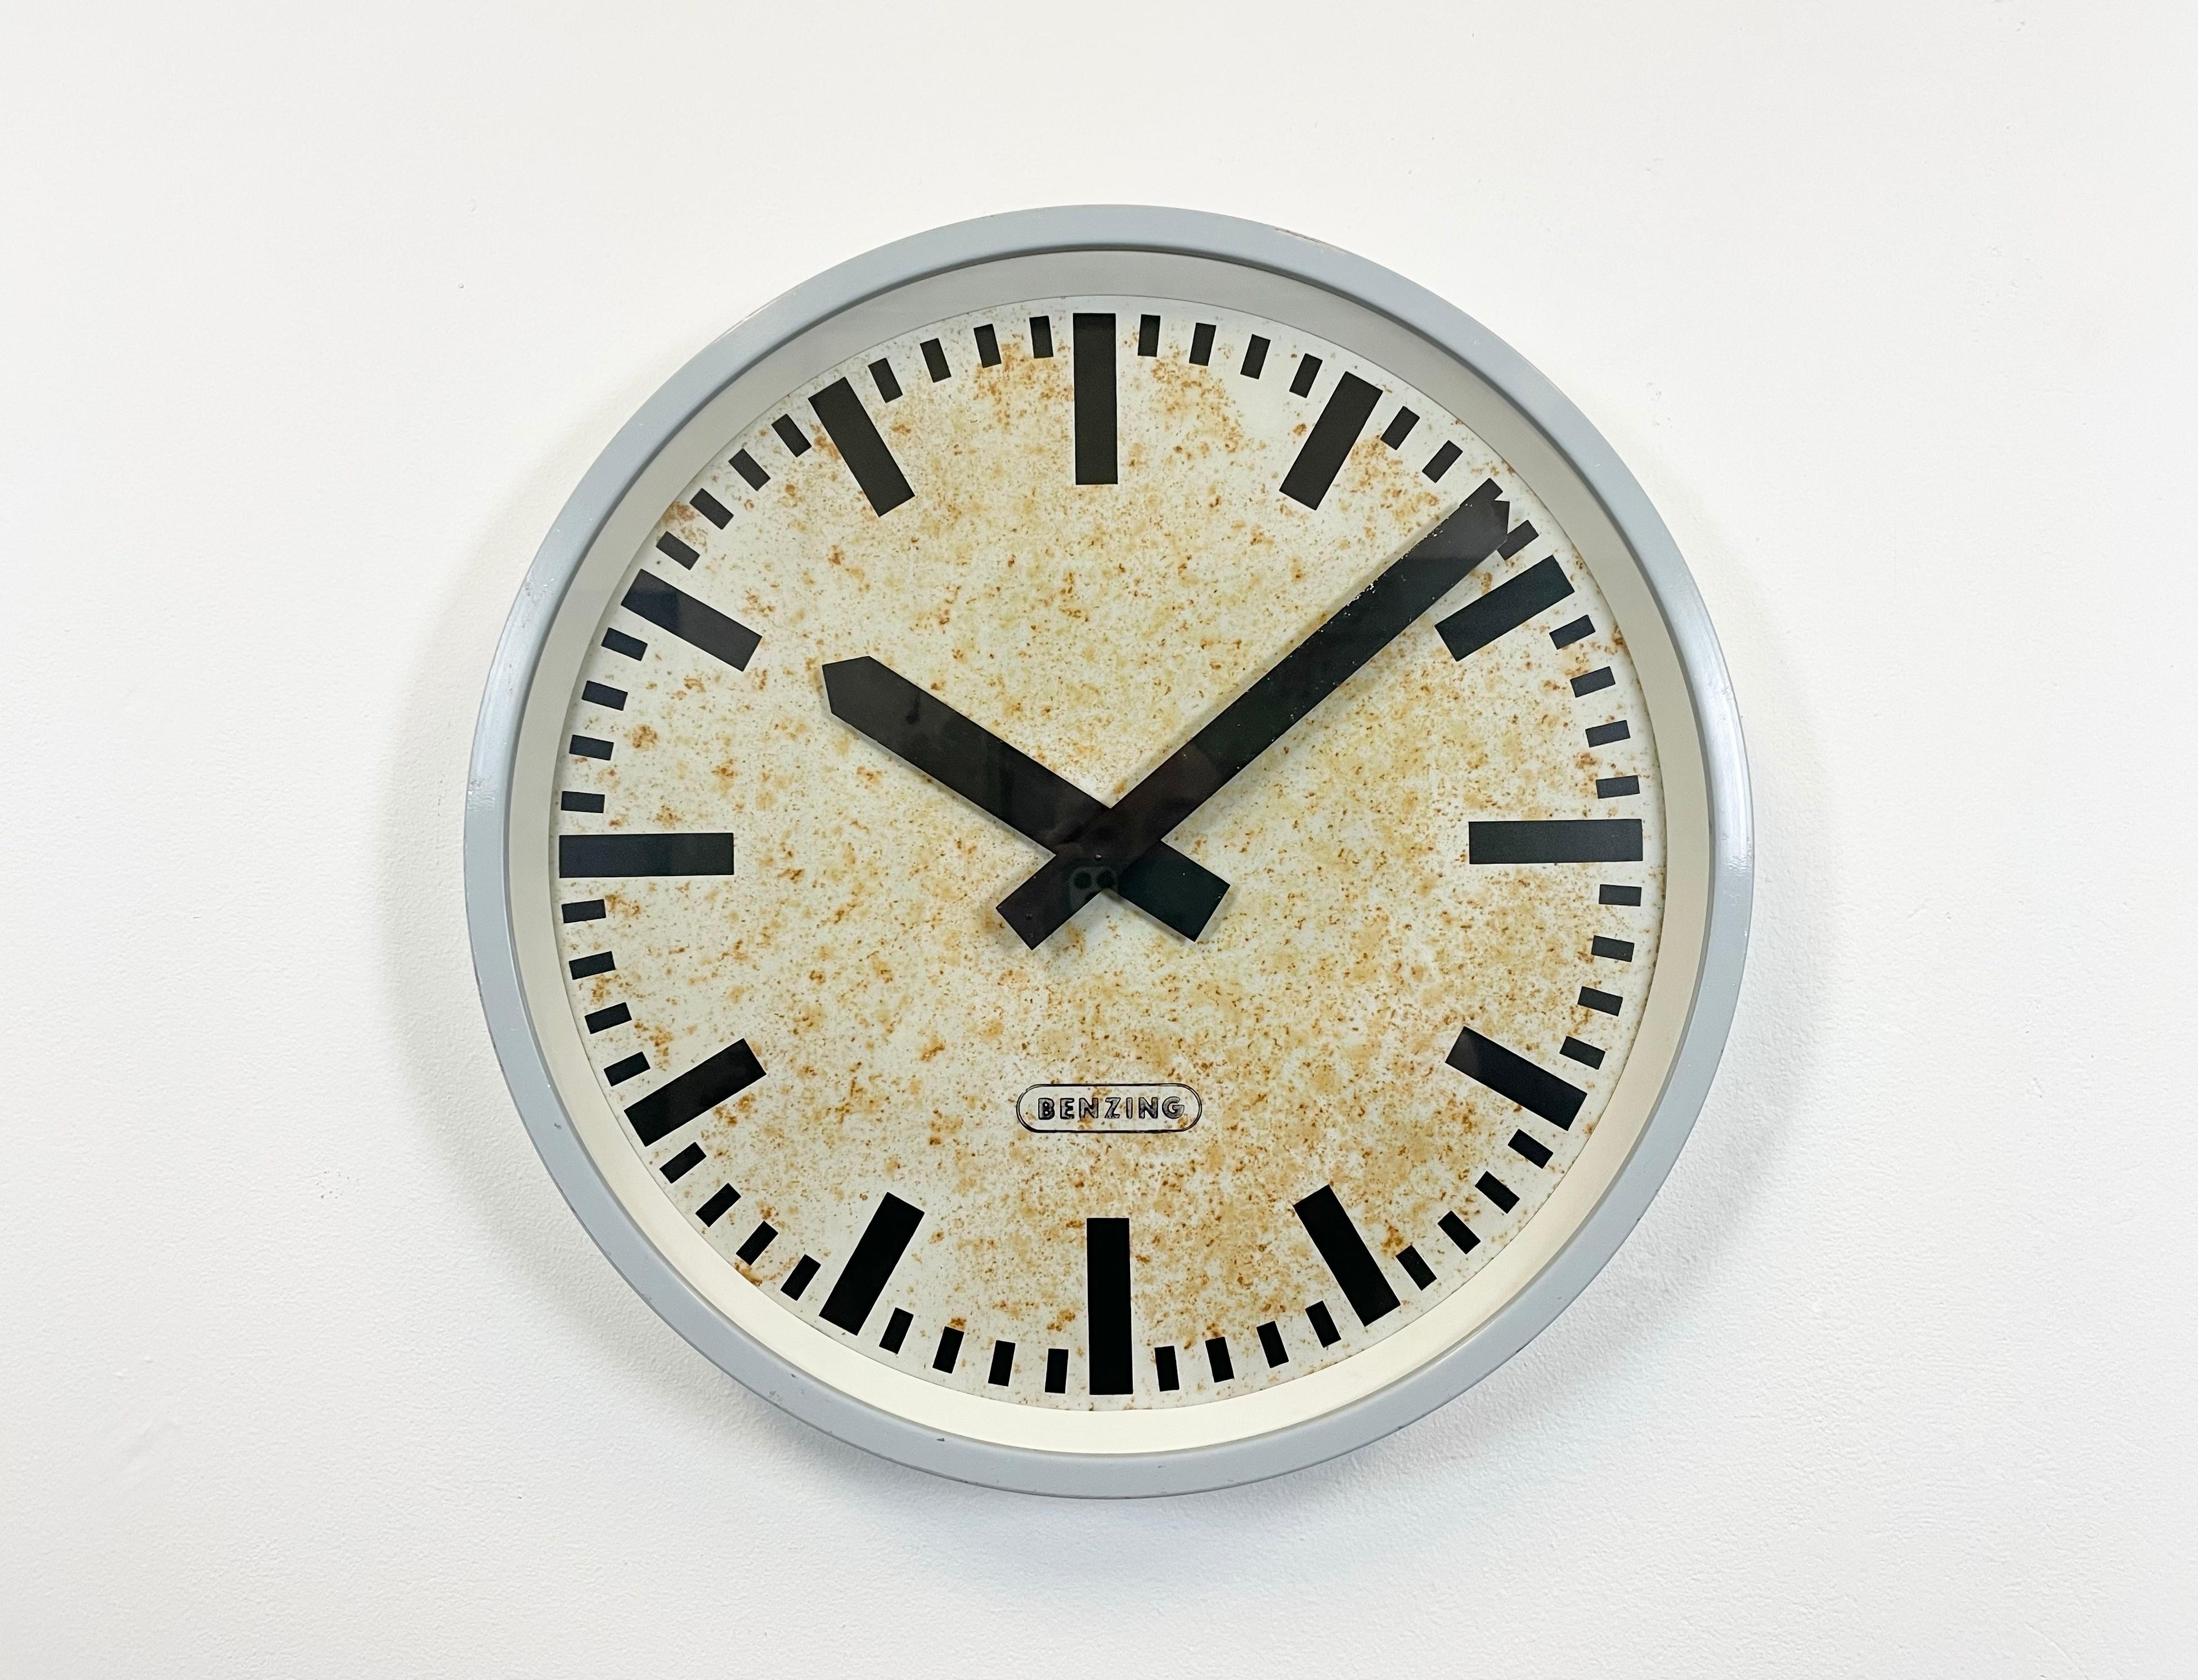 Benzing wall clock was made in Germany during the 1960s. It features a grey iron frame, a metal dial, an aluminium hands and clear glass cover. The piece has been converted into a battery-powered clockwork and requires only one AA-battery. The